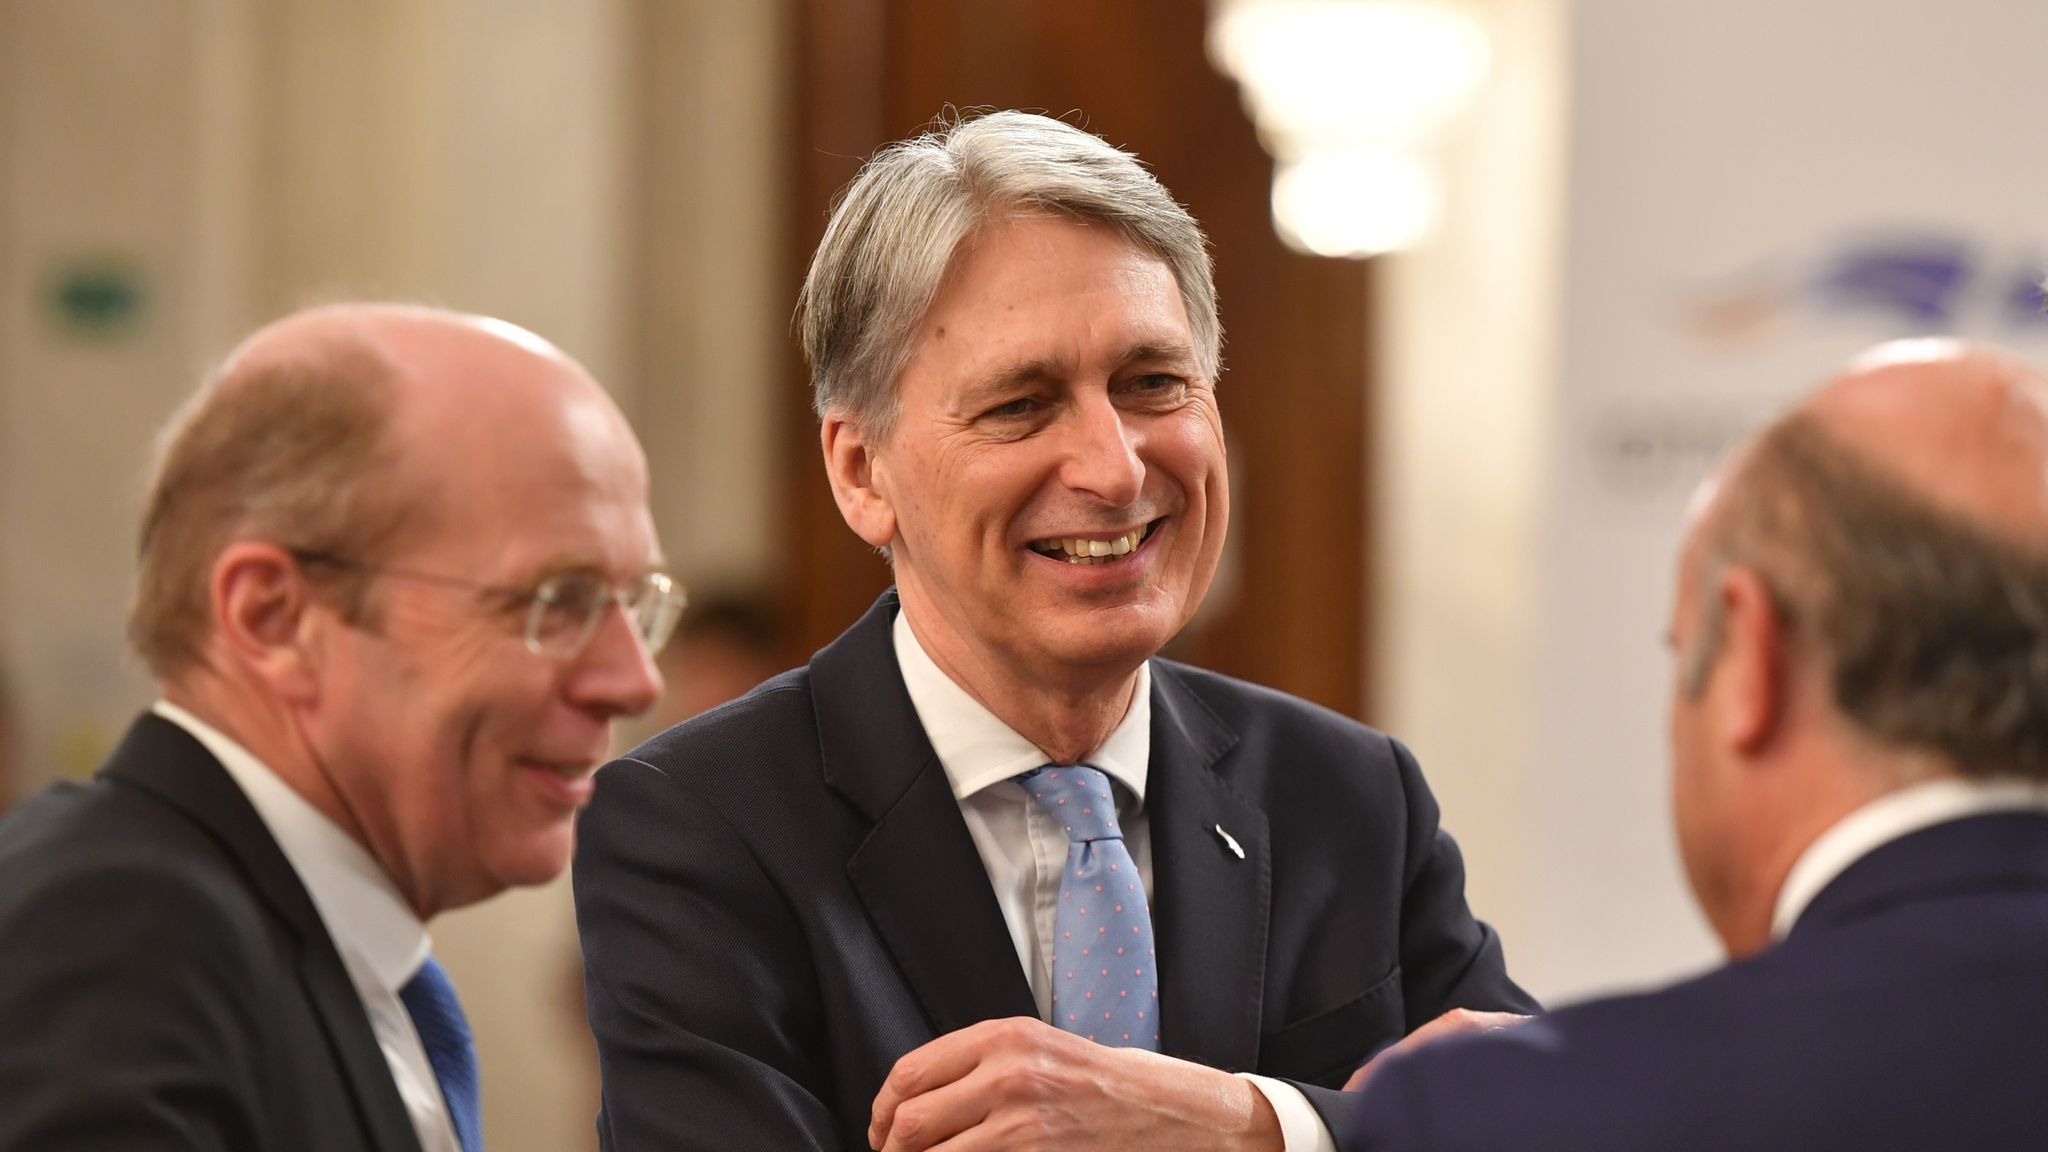 Brexit: Govt has 'no red lines' in talks with Labour - Hammond ...